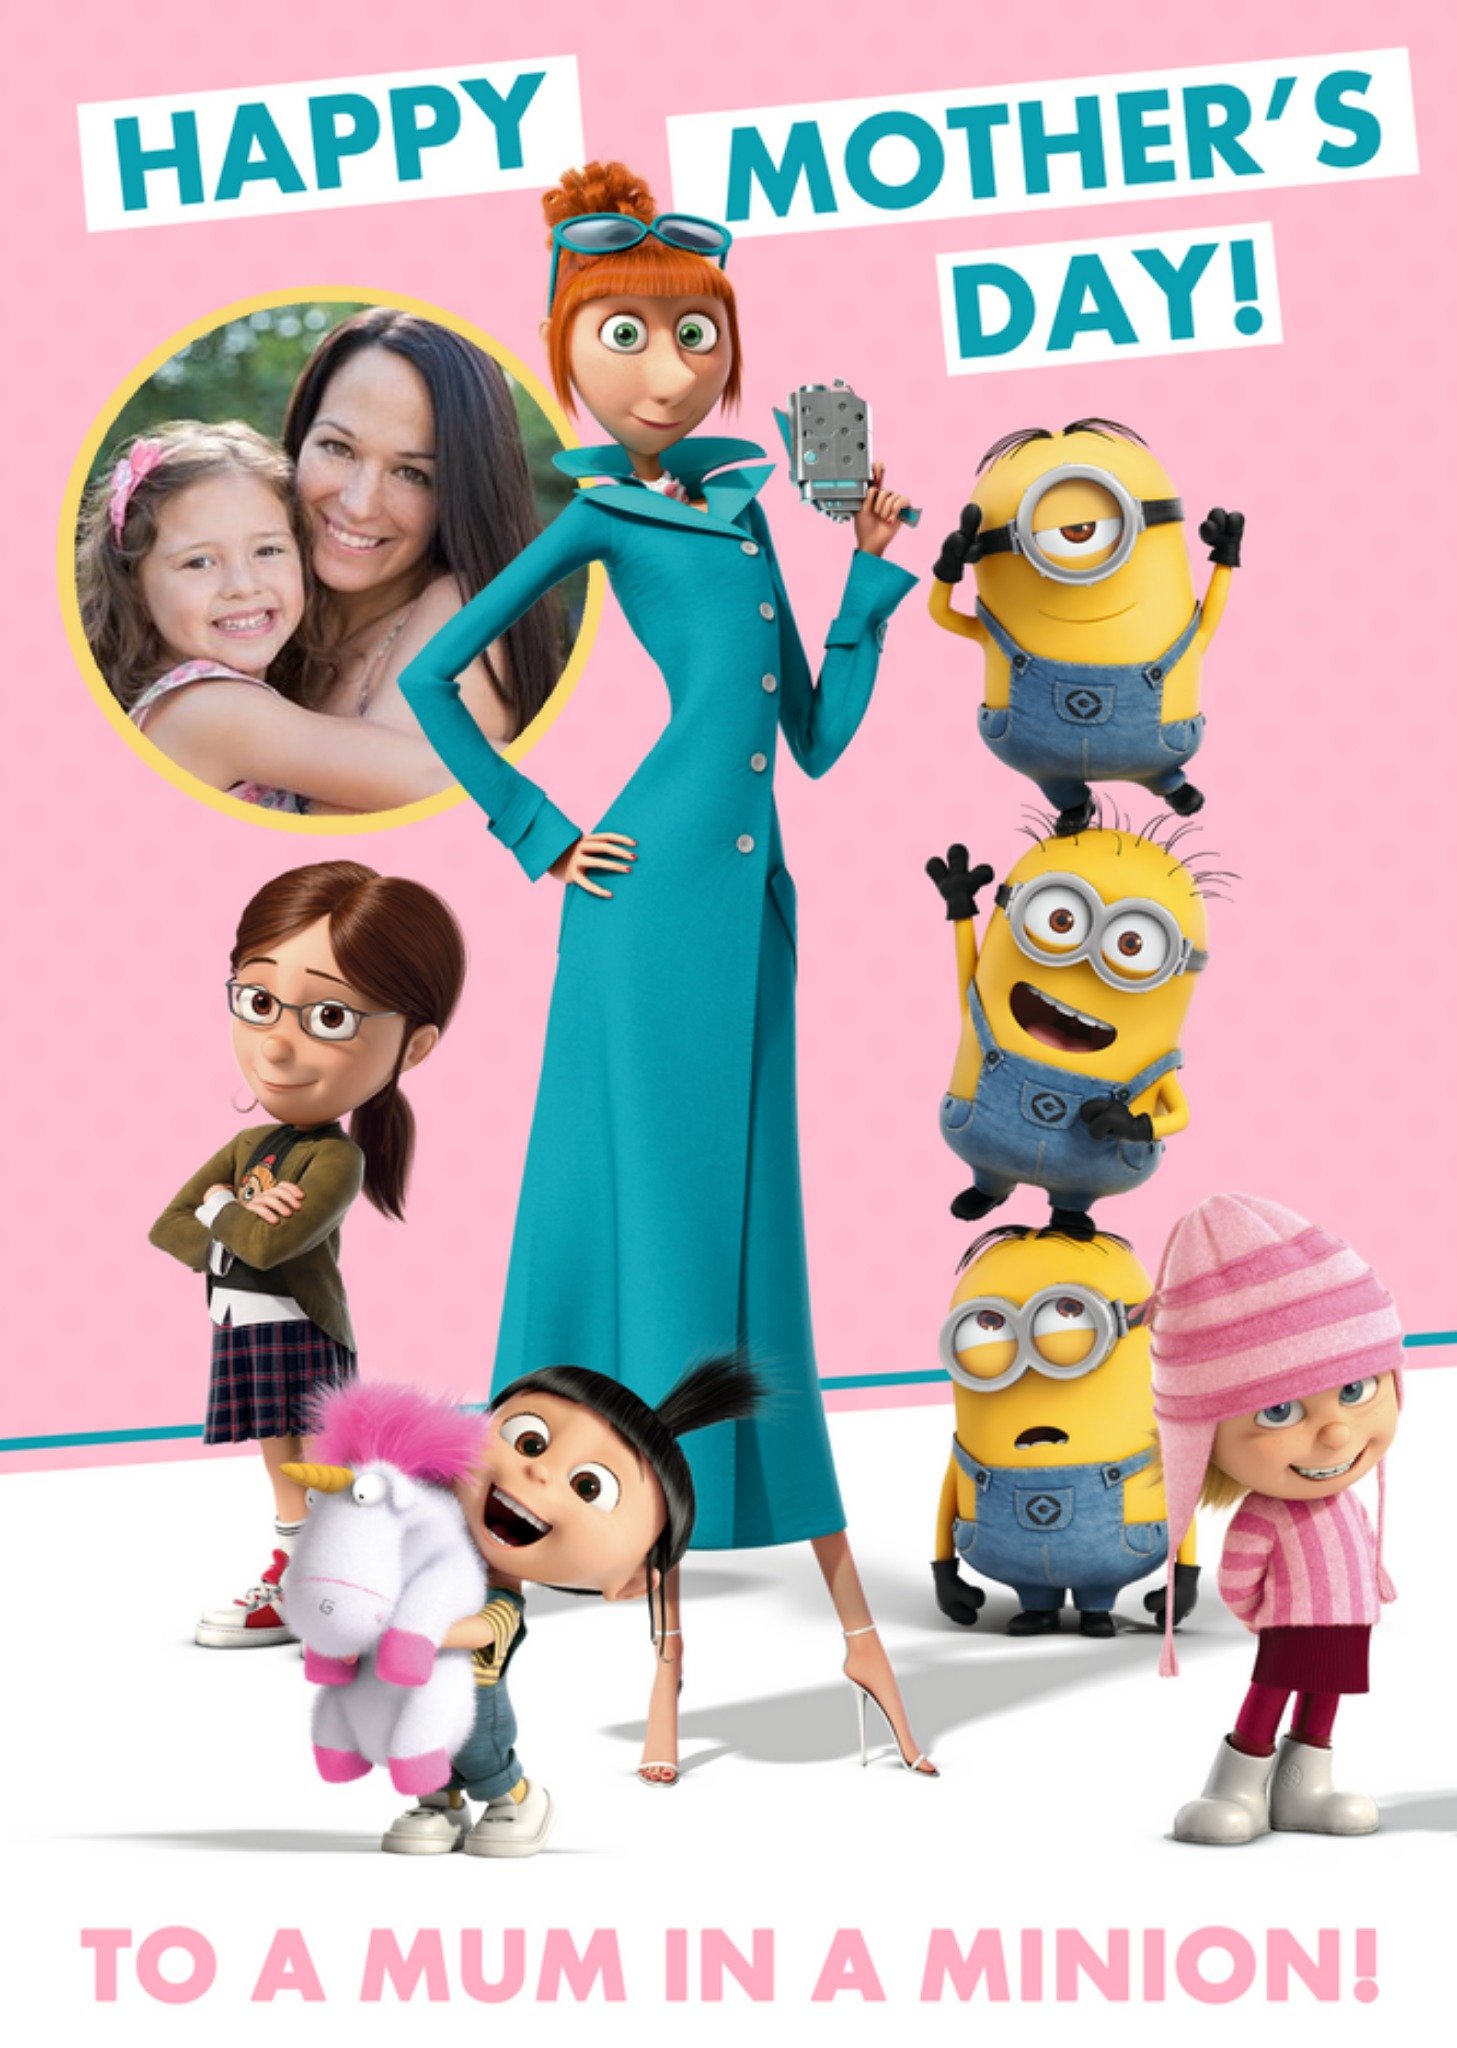 Mother's Day Card - Mum - Minions - Despicable Me- Photo Upload Card, Large